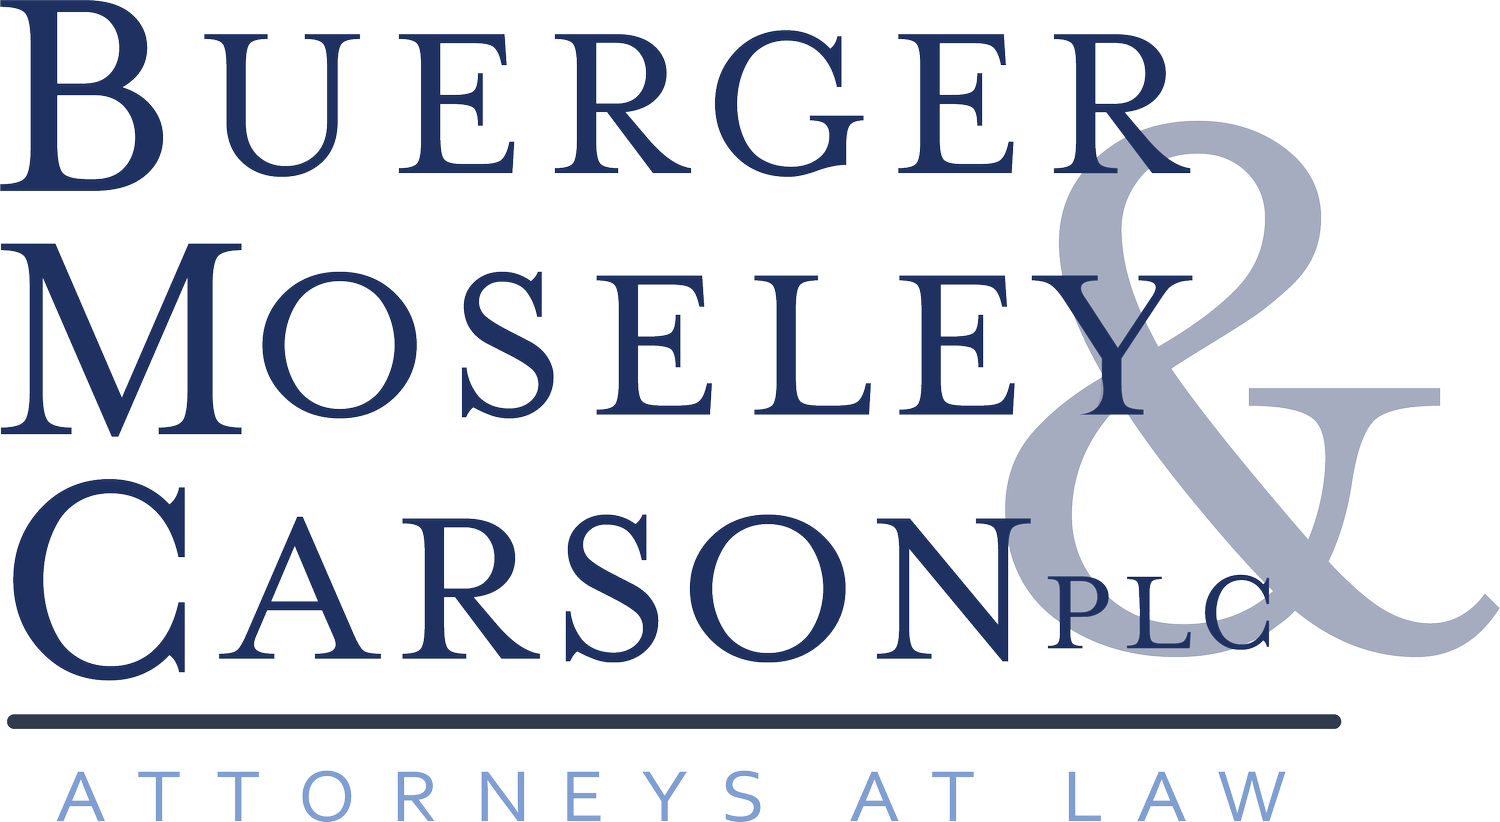 Buerger, Moseley and Carson, PLC